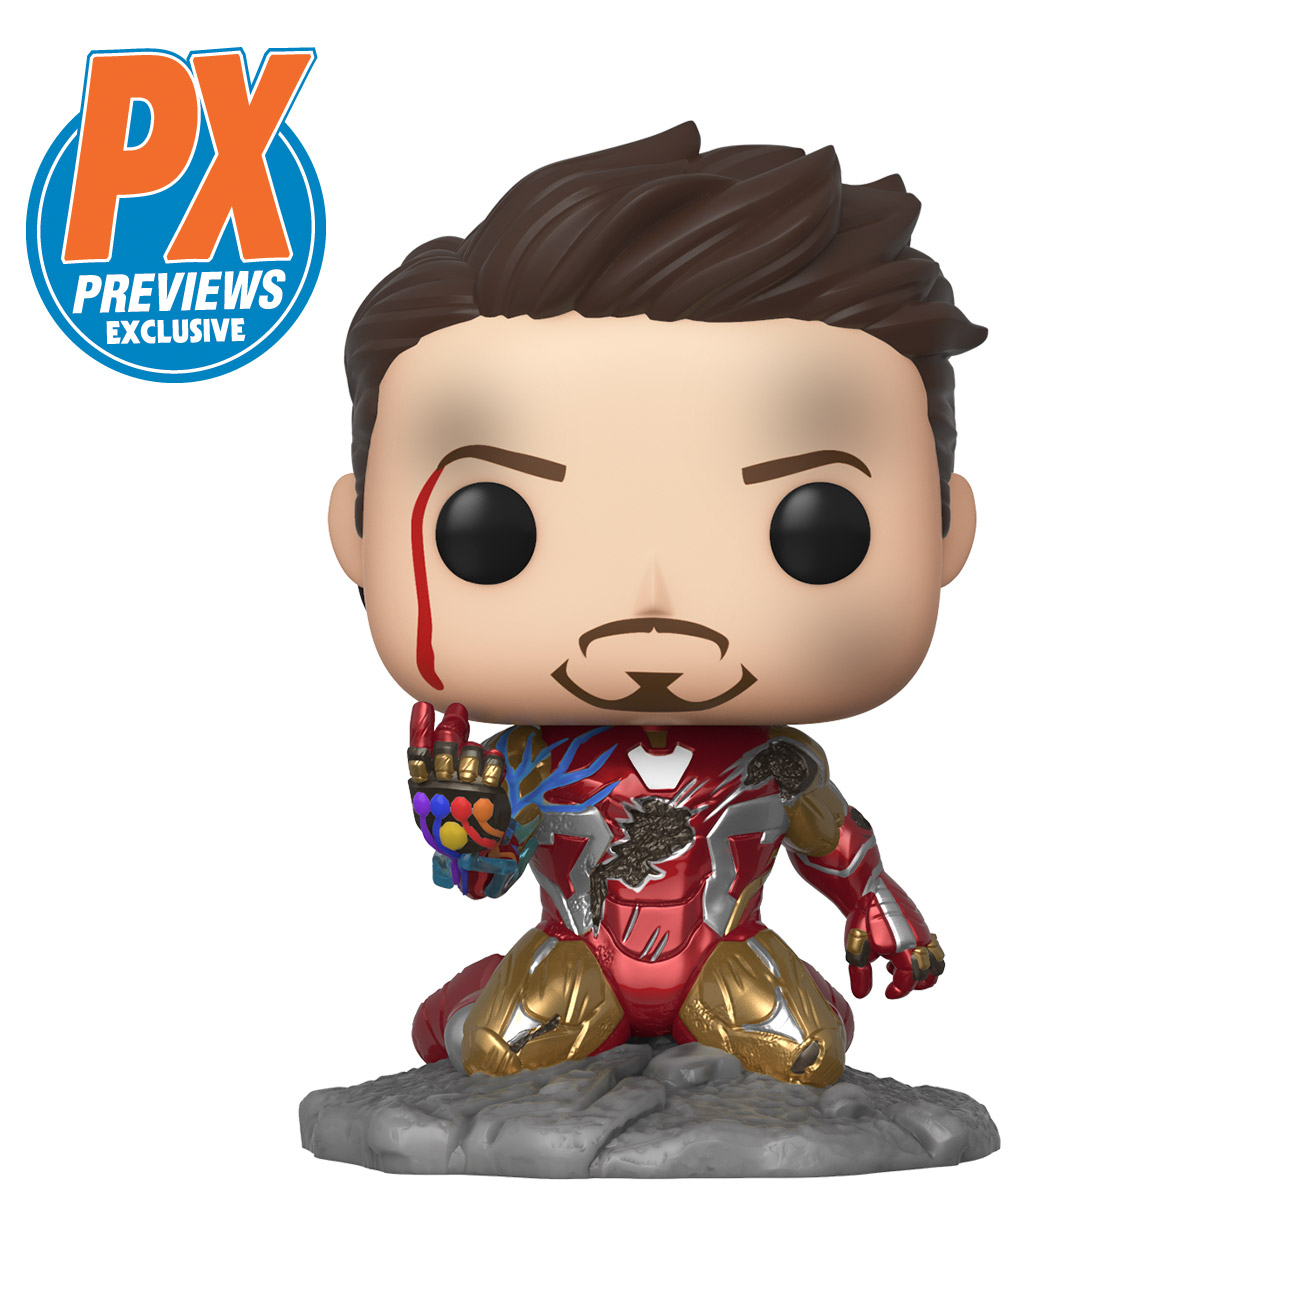 Preorder Out For Tony Stark S Triumphant Endgame Moment As A Funko Px Exclusive Gitd Pop Maltacomics